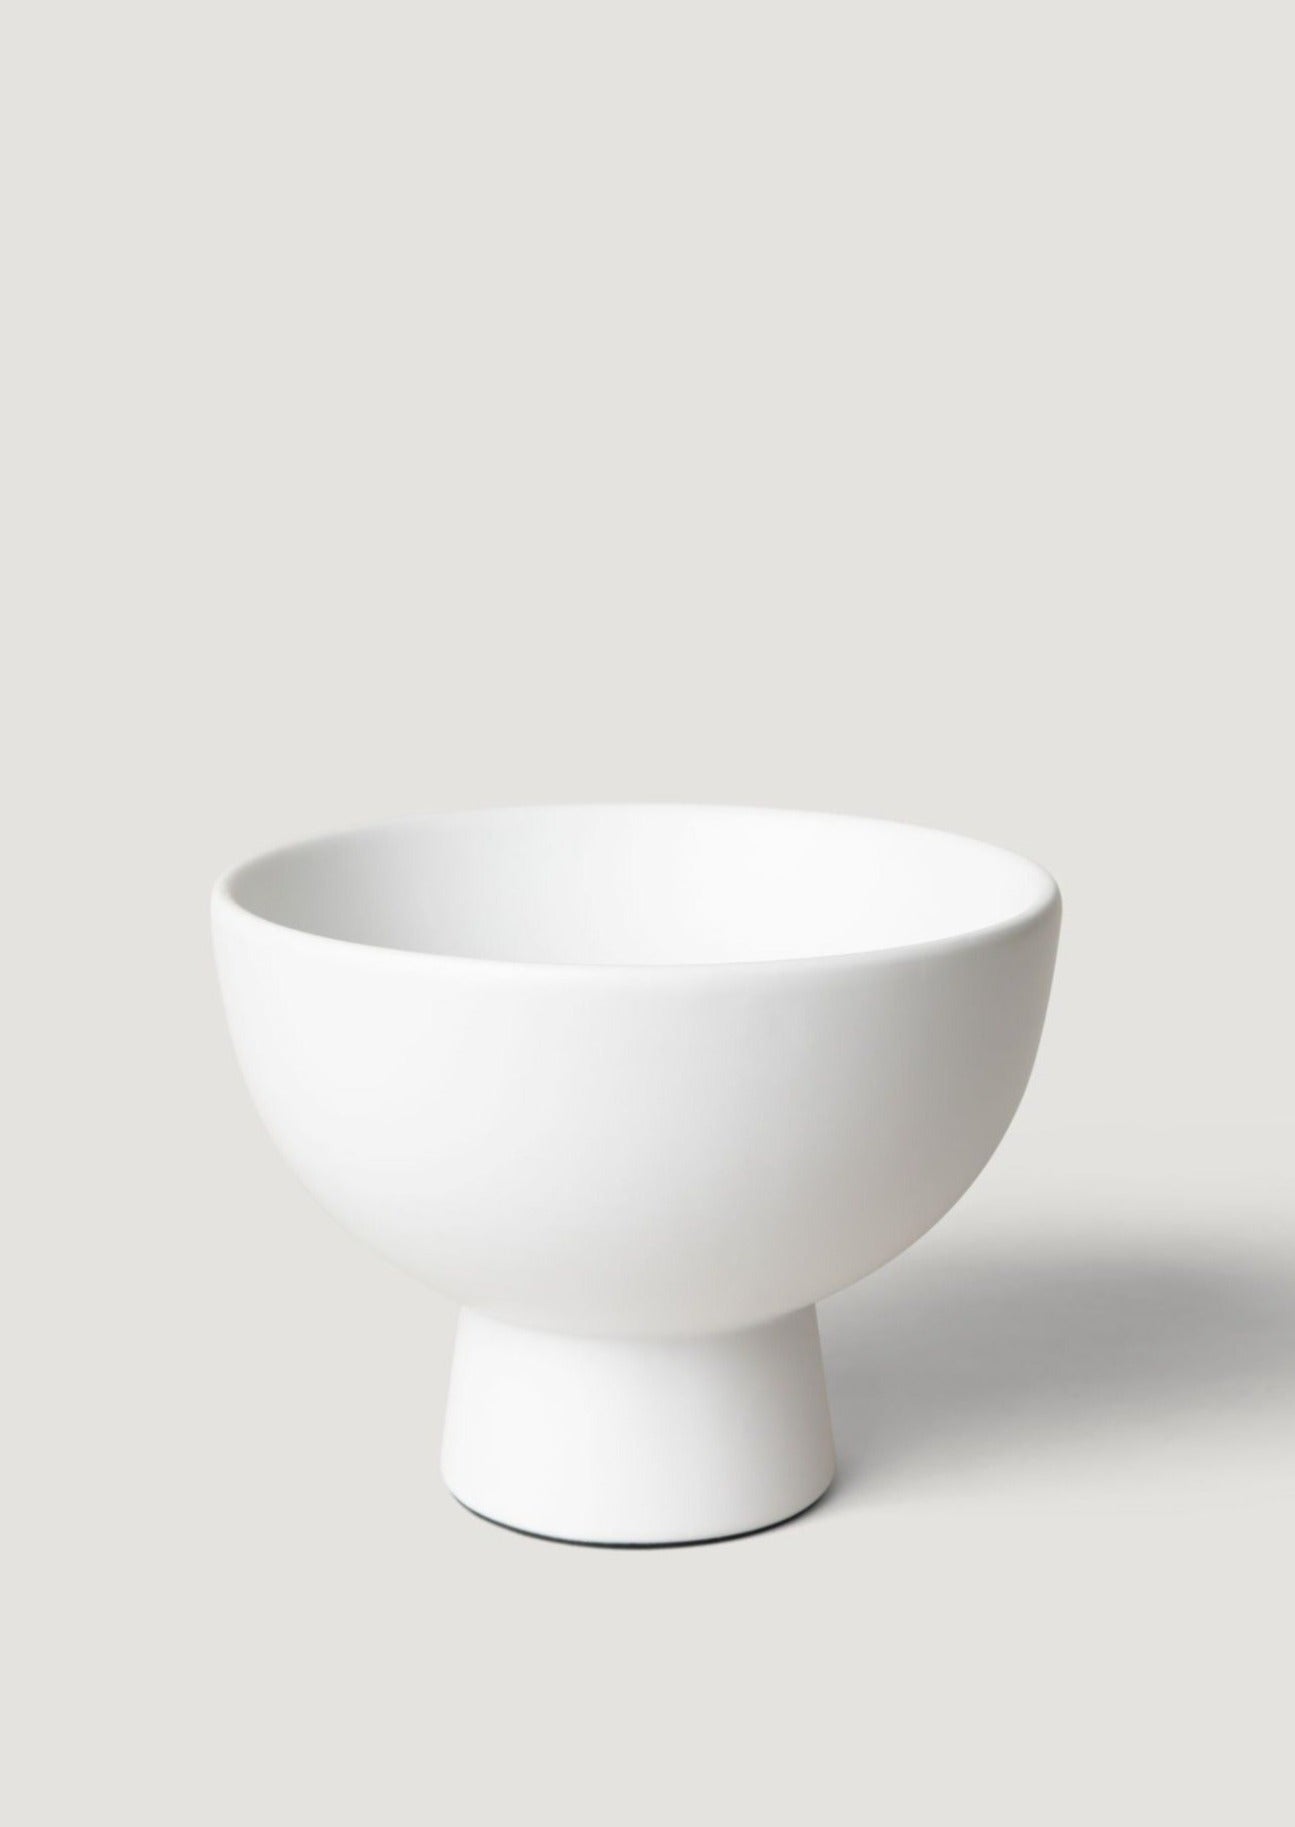 Large White Ceramic Compote Bowl at Afloral 